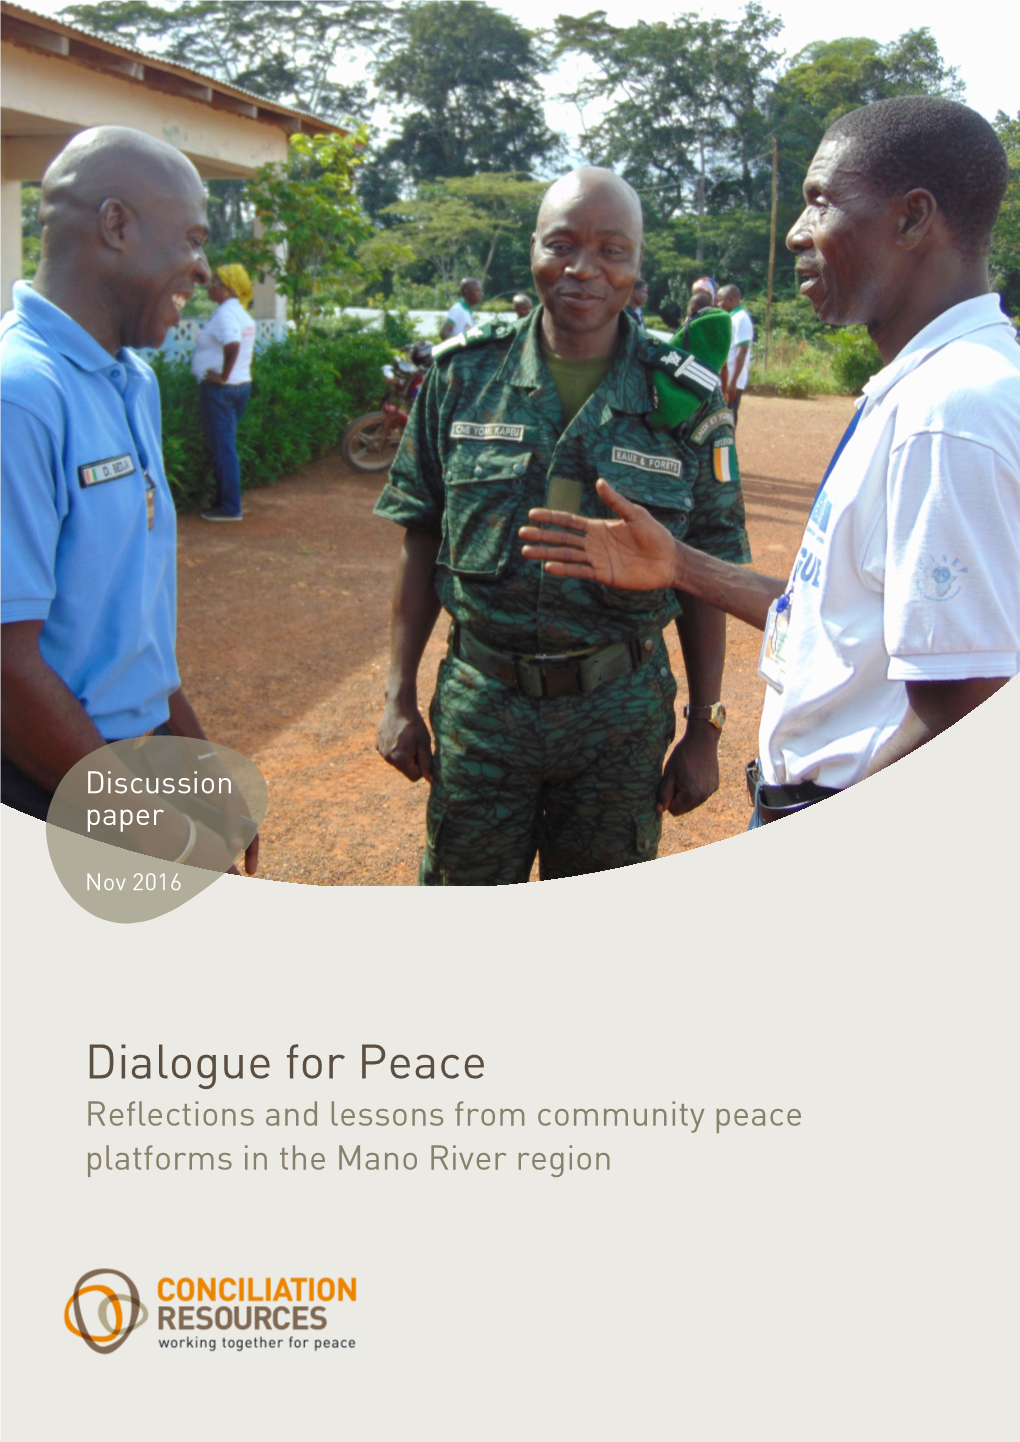 Dialogue for Peace Reflections and Lessons from Community Peace Platforms in the Mano River Region